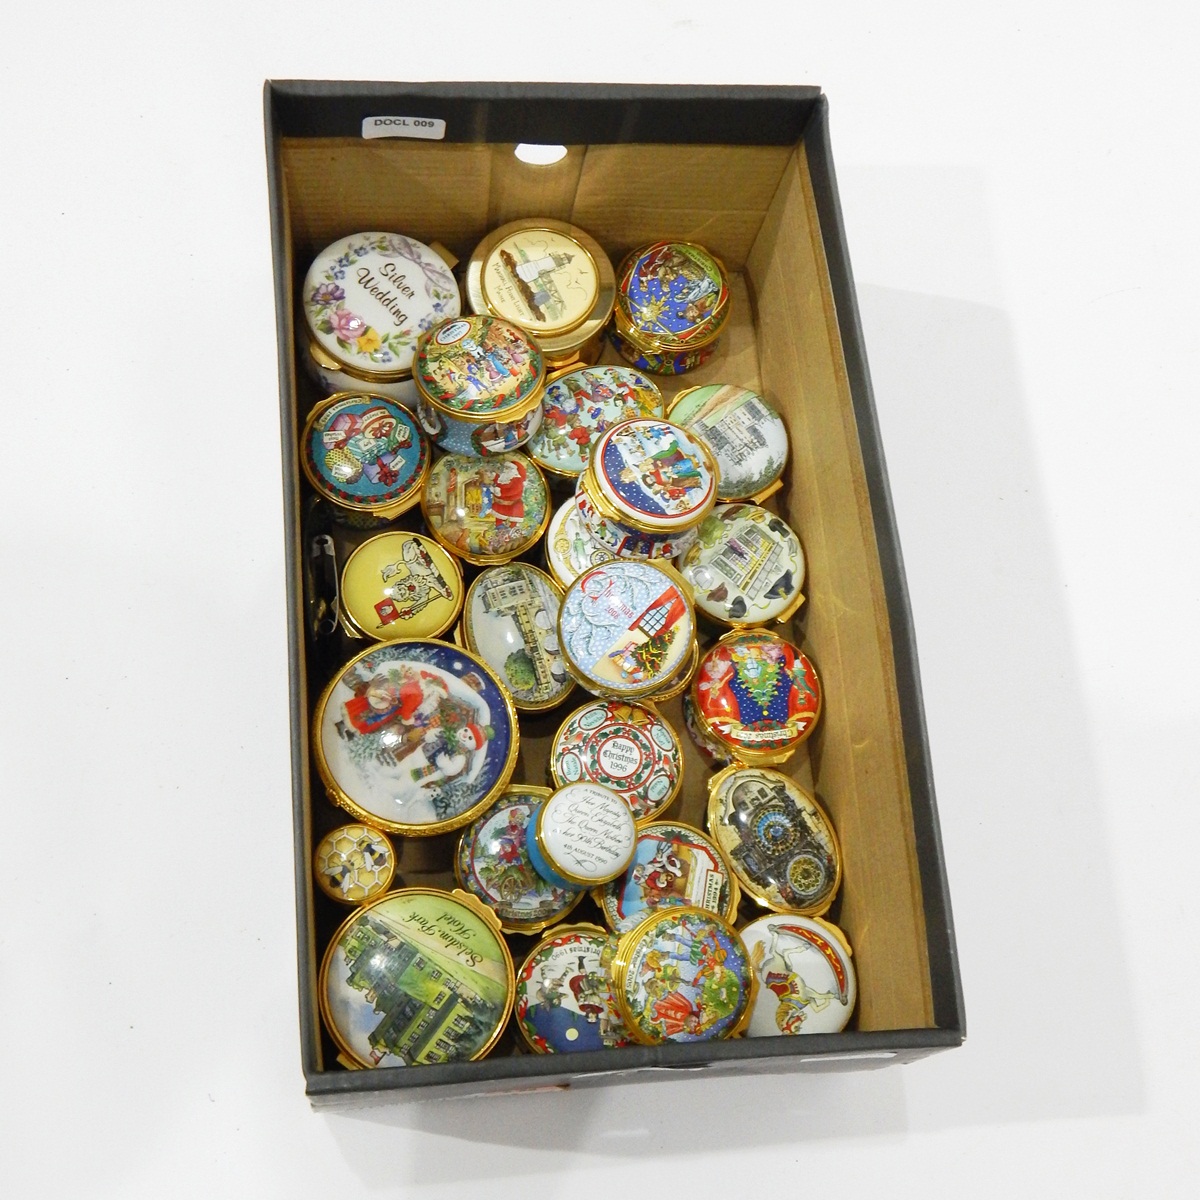 Quantity of Halcyon Day and other enamel and decorative pots (2 boxes)